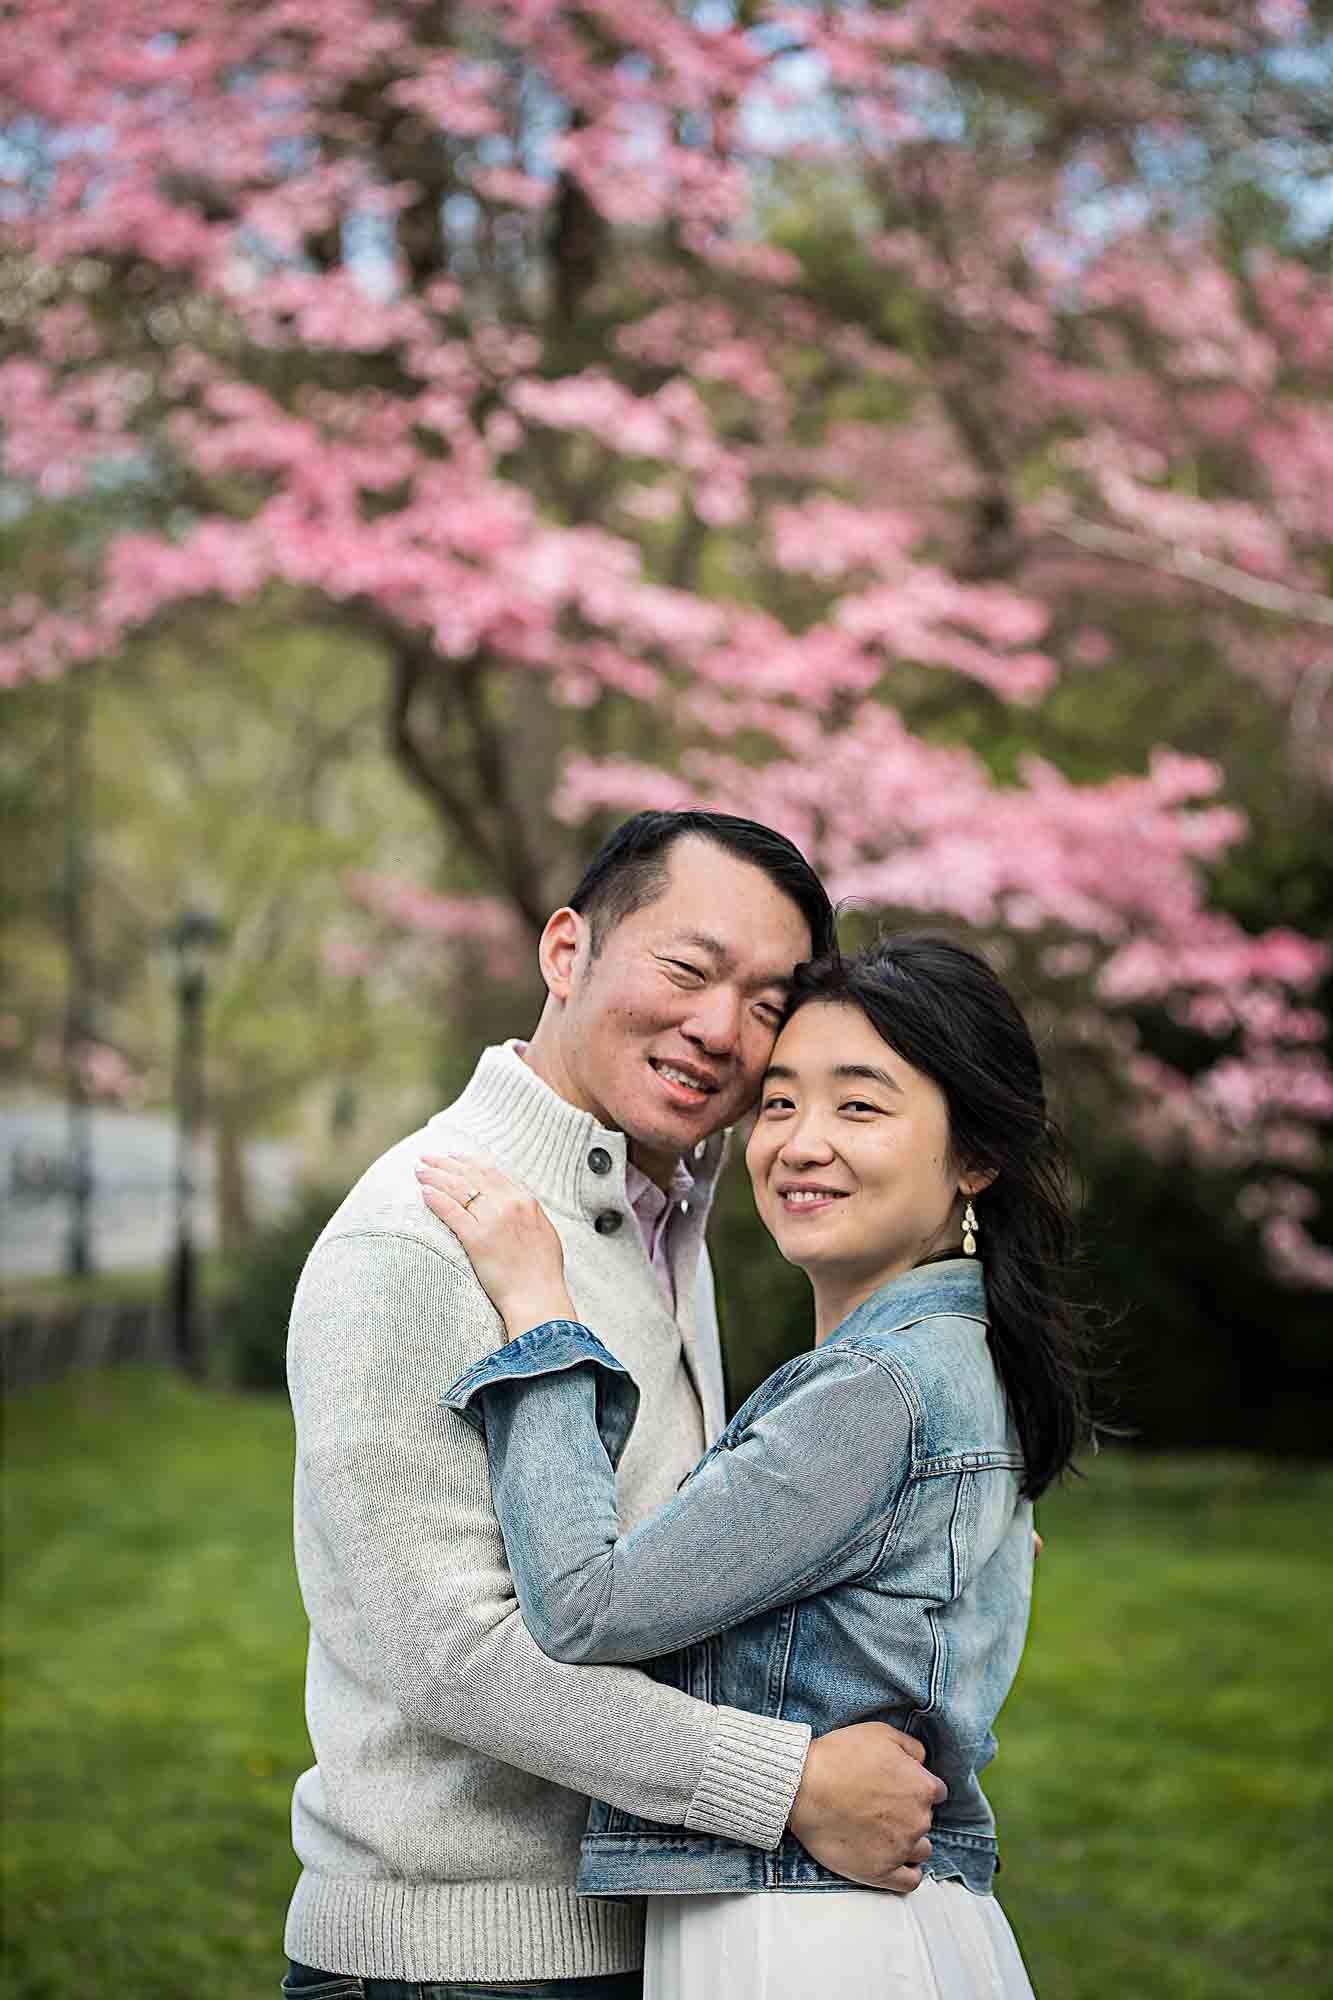 Couple hugging in front of pink flowering tree in Central Park